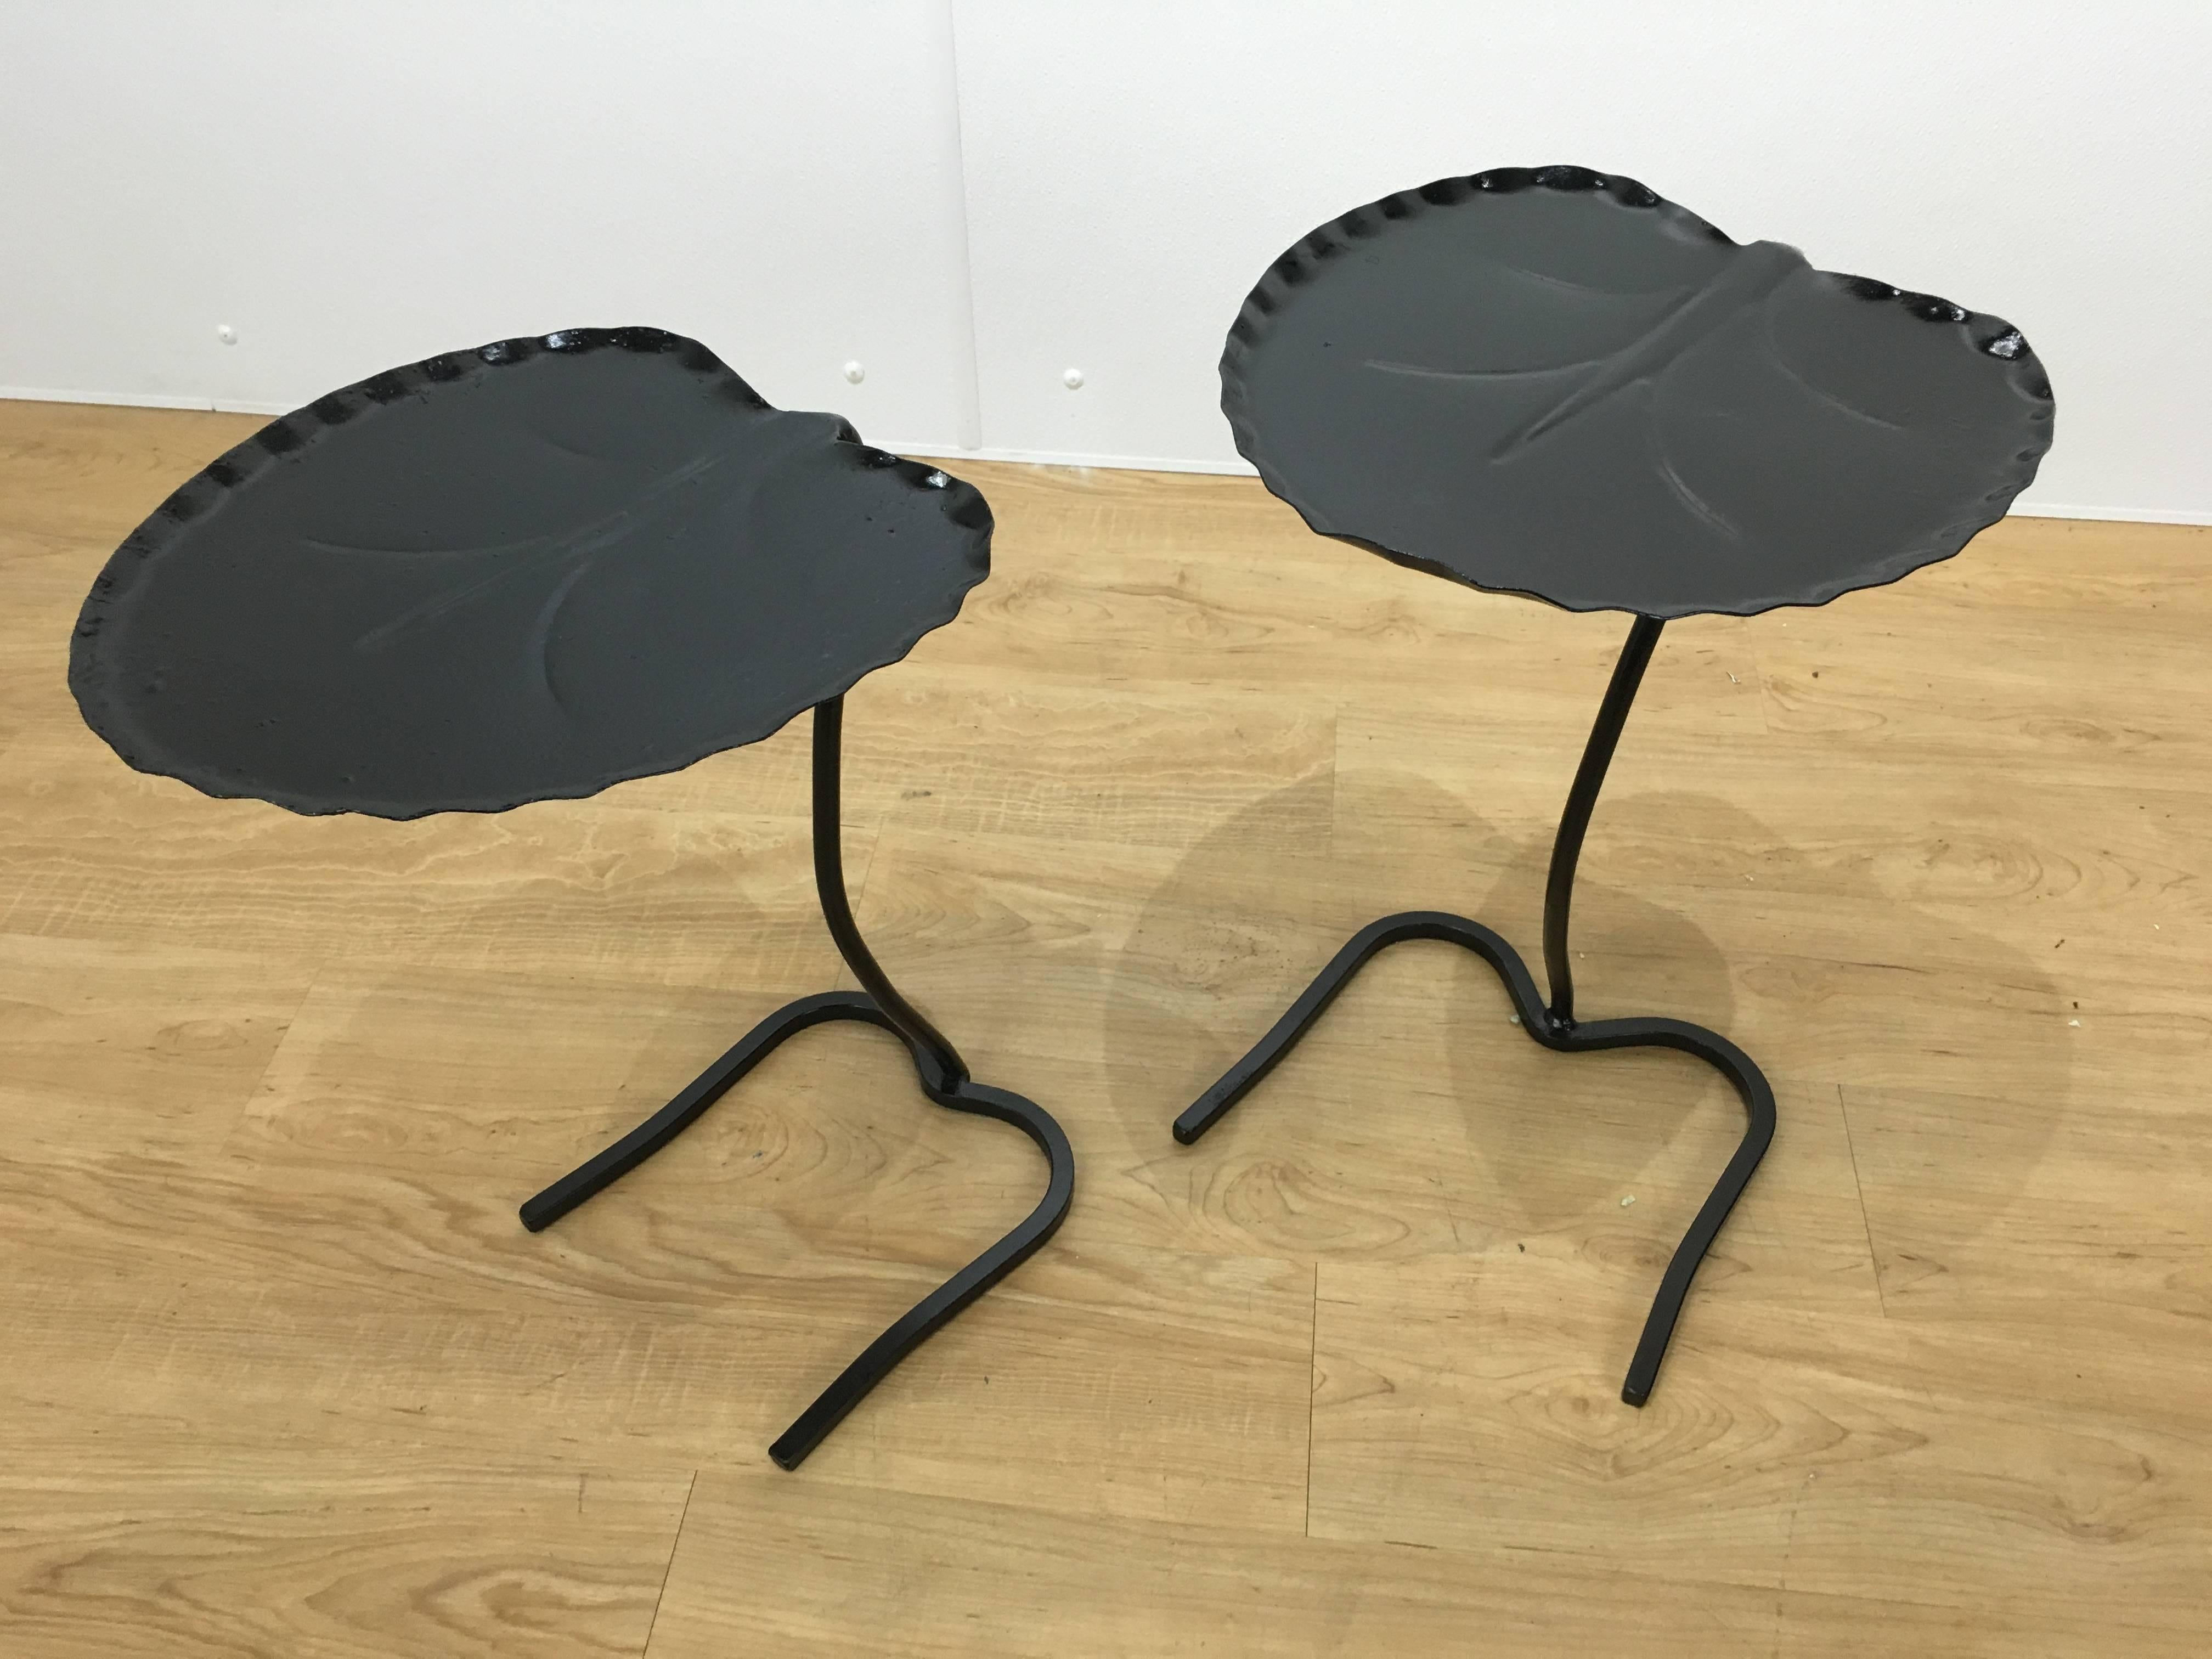 Pair of Salterini lily pad nesting tables, each one naturalistic modeled.
Small measures 18.75"H x 11"W x 12"D.
Large measures 20"H x 11"W x 12"D.
